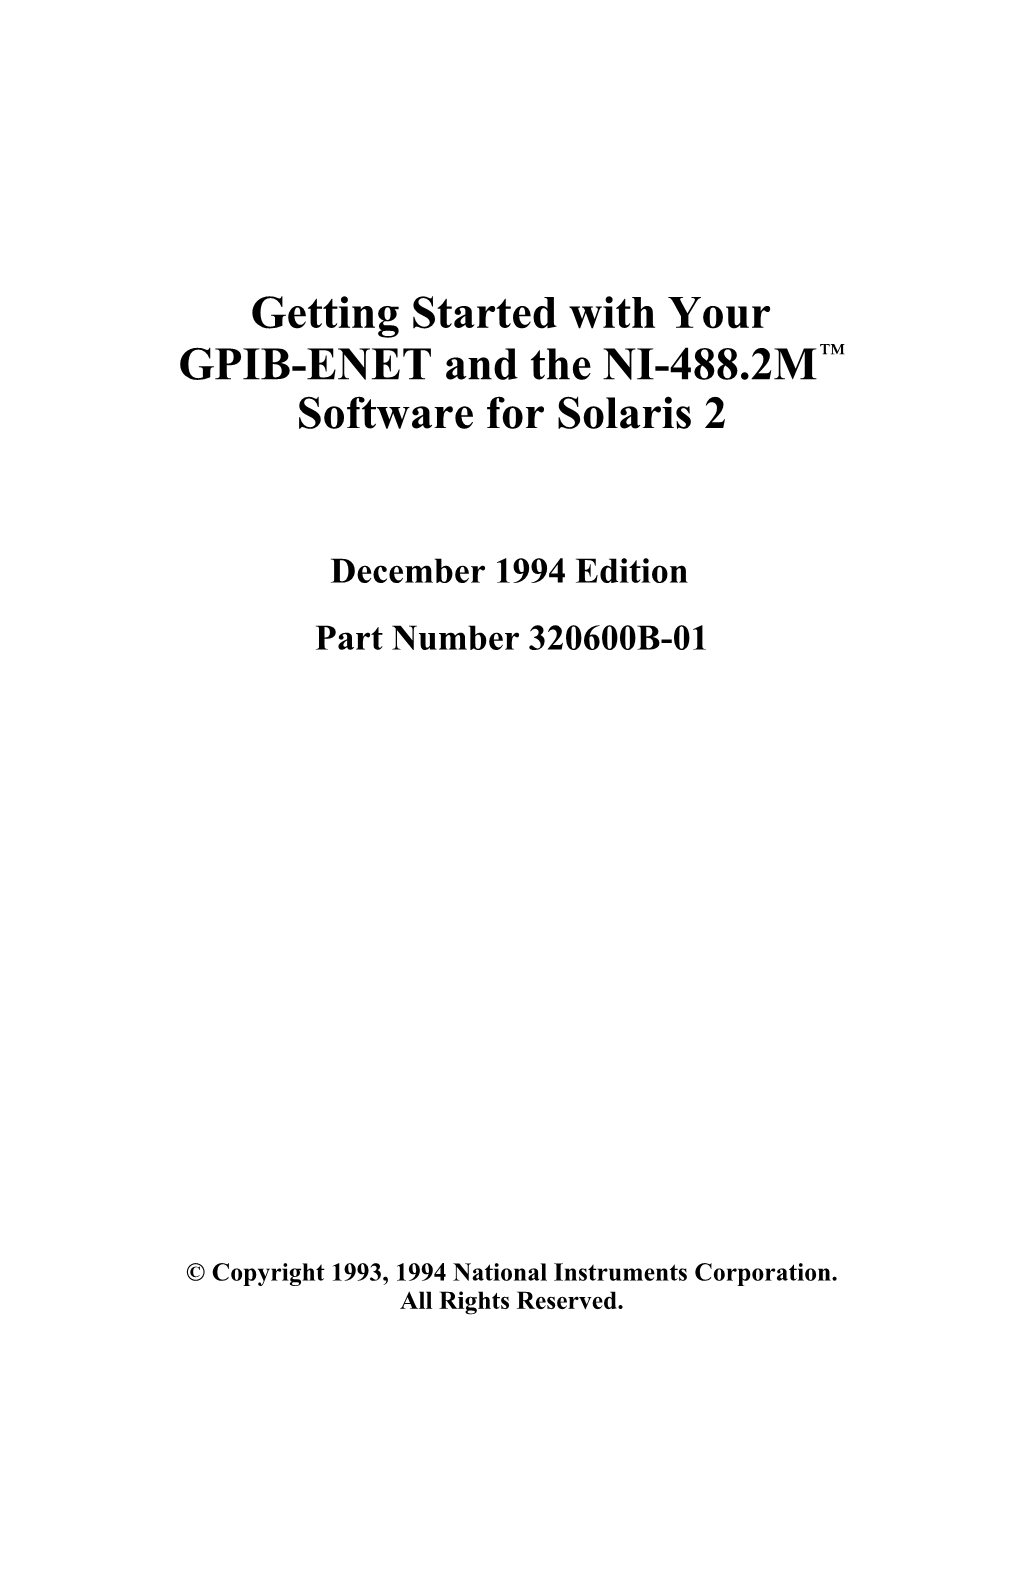 Getting Started with Your GPIB-ENET and the NI-488.2M™ Software For